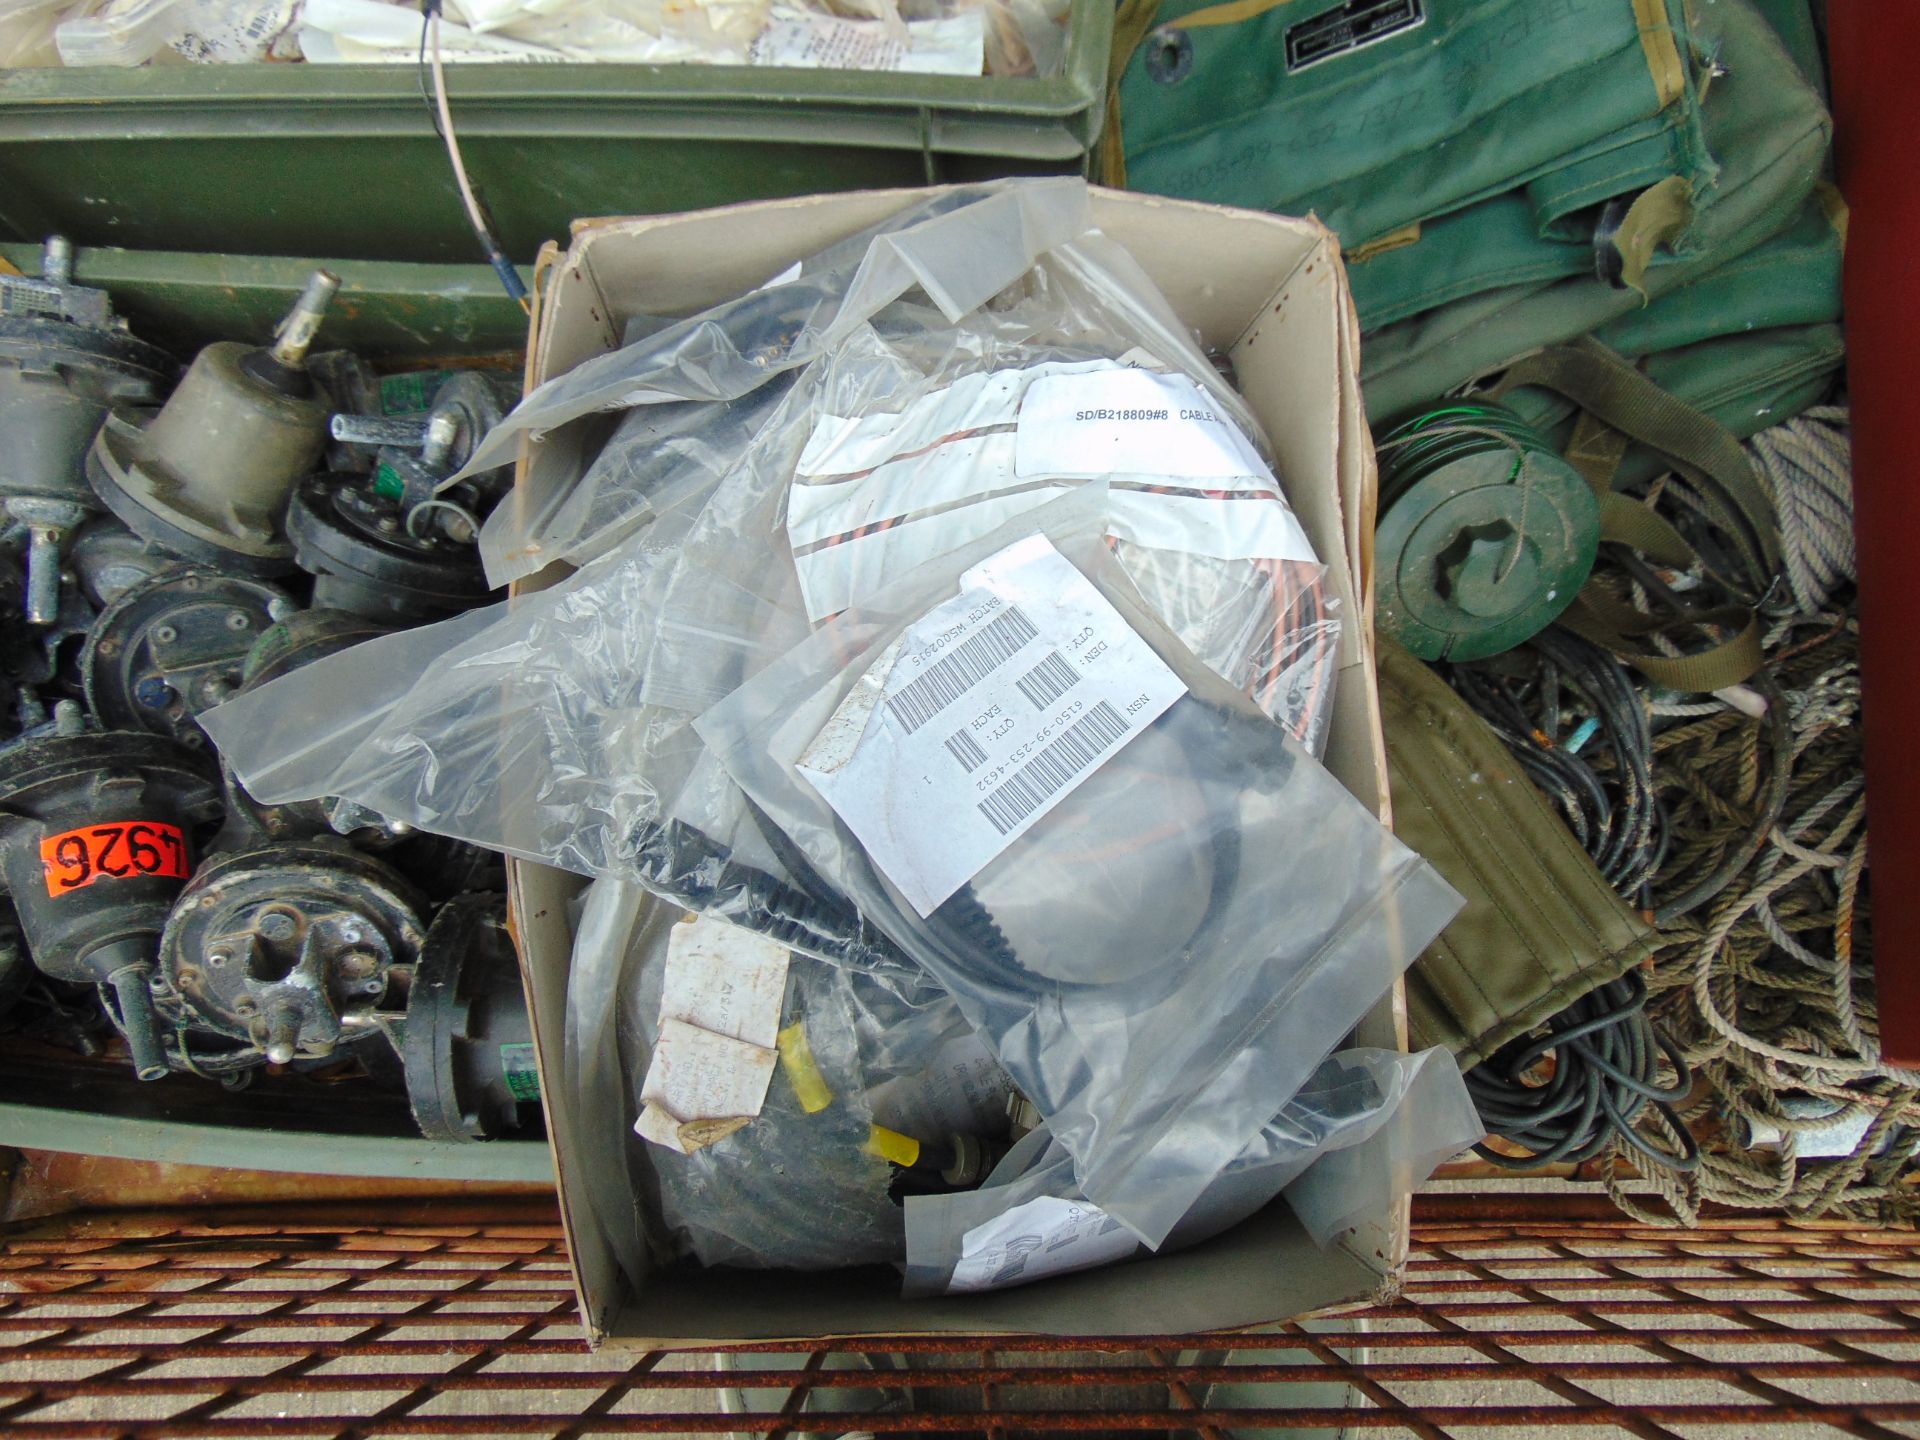 1 x Mixed Stillage of Clansman Radio Equipment inc Cables, Headsets, Anntenna units etc - Image 7 of 7